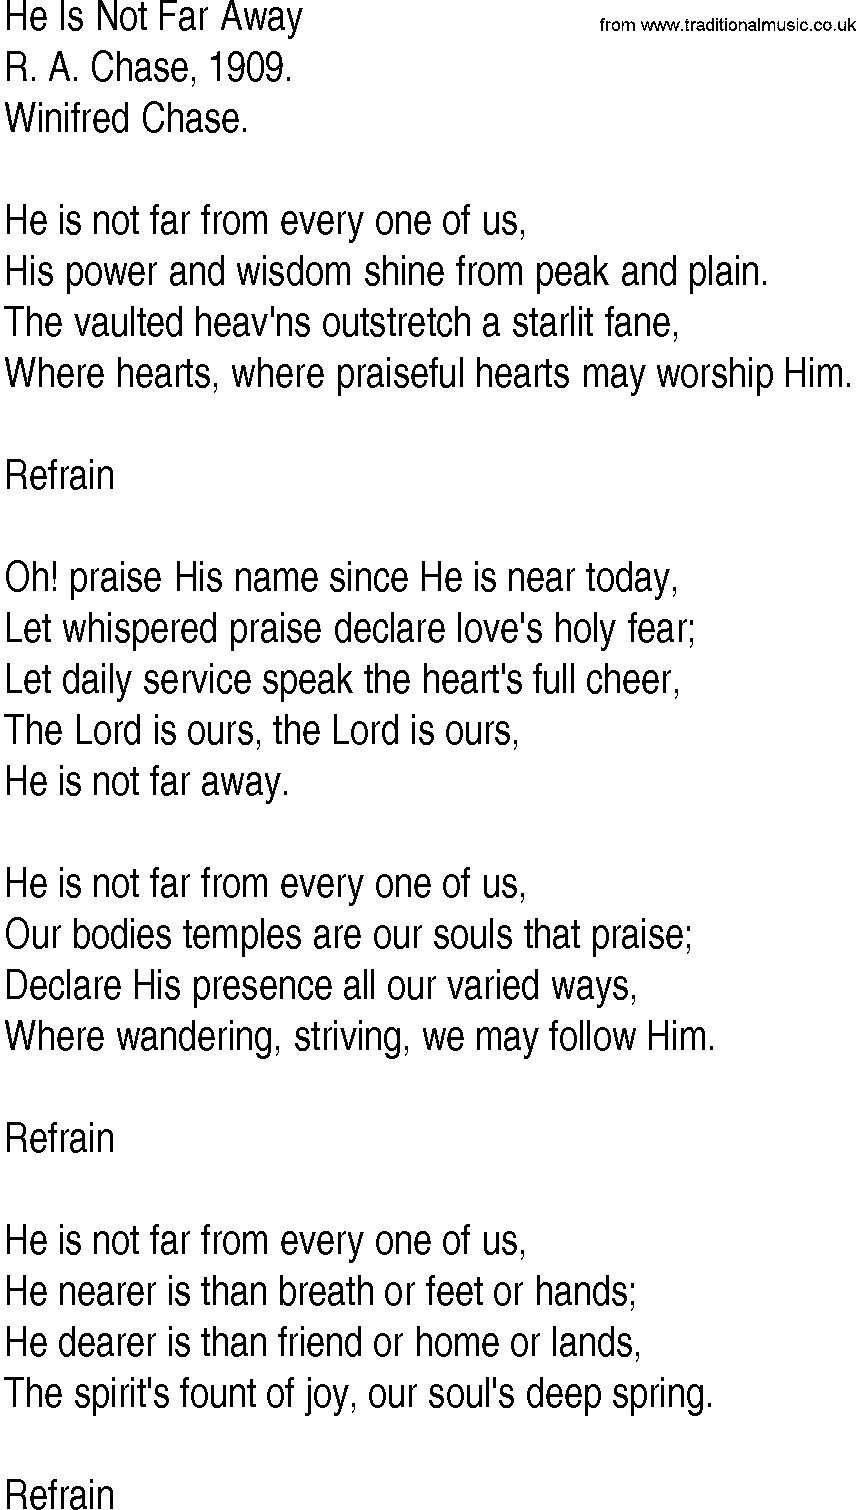 Hymn and Gospel Song: He Is Not Far Away by R A Chase lyrics